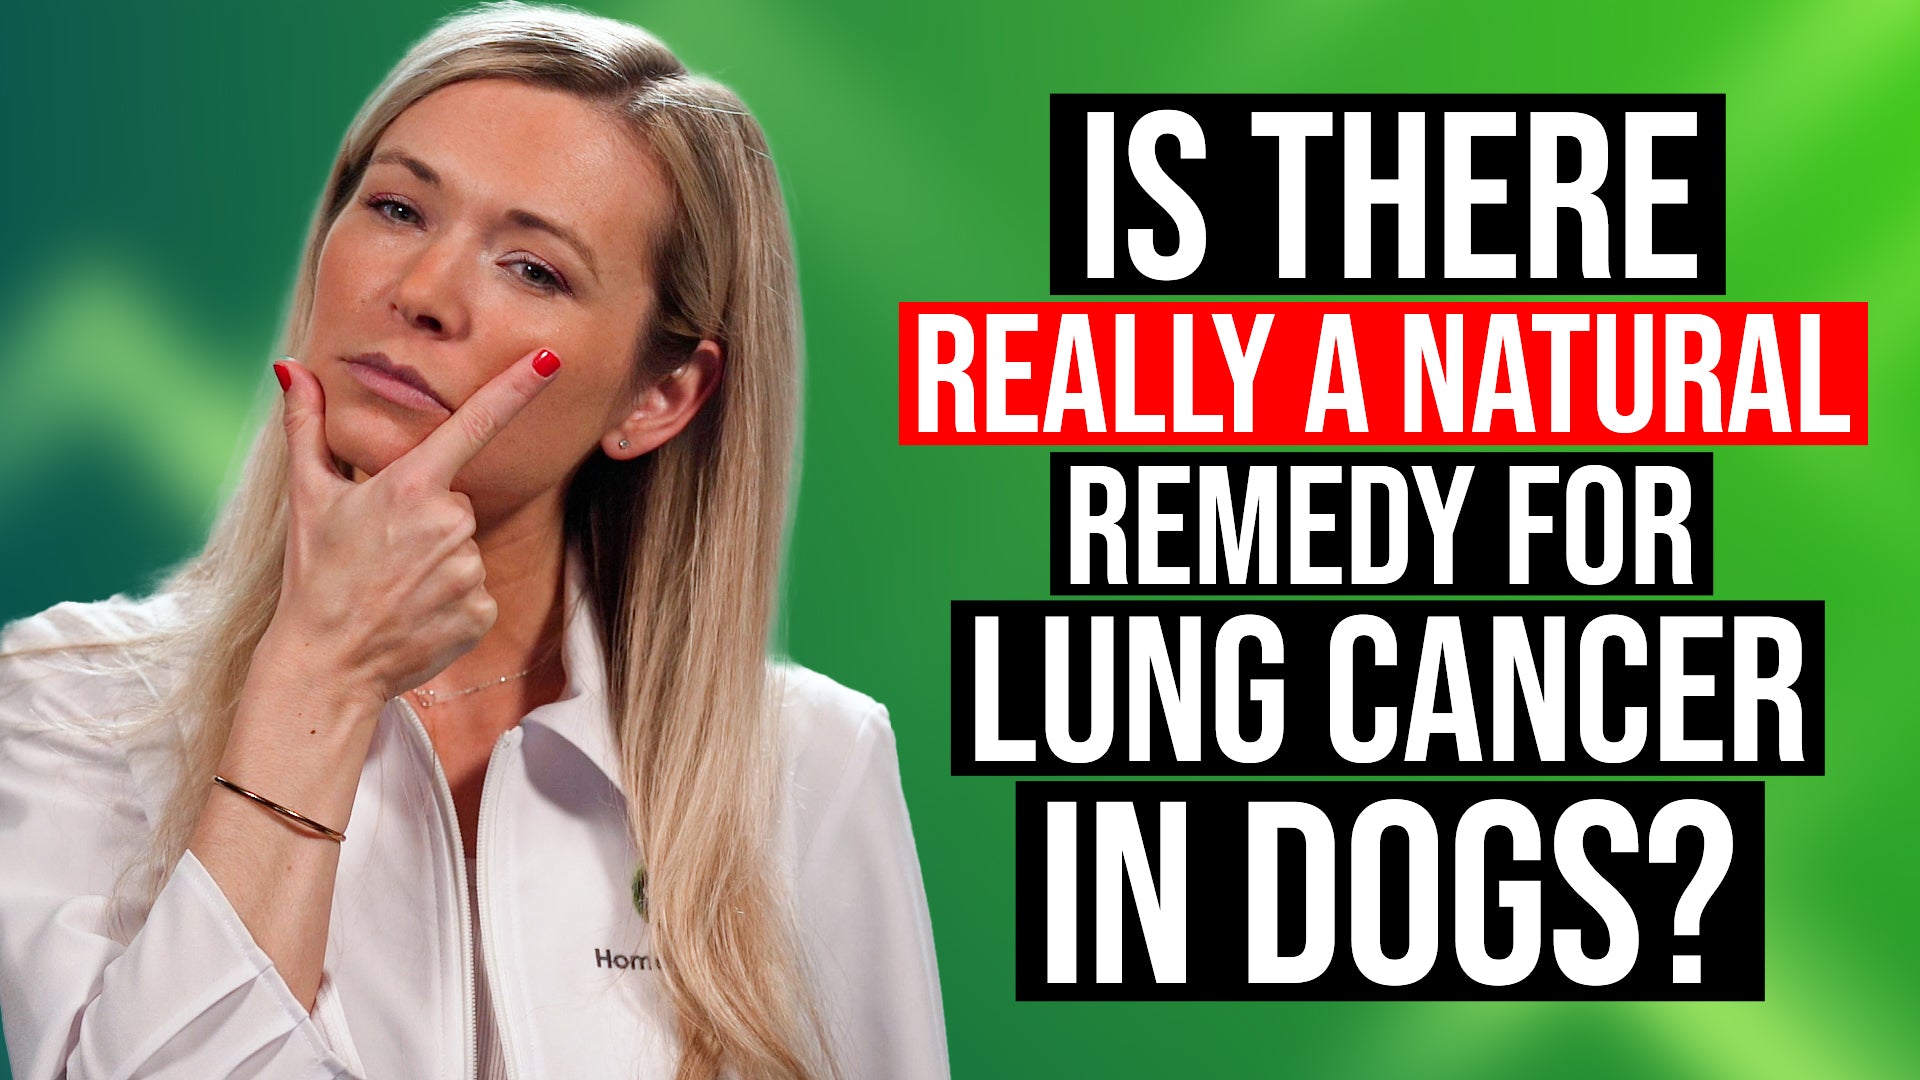 Lung Cancer in Dogs | The Right NATURAL Remedies to Go For